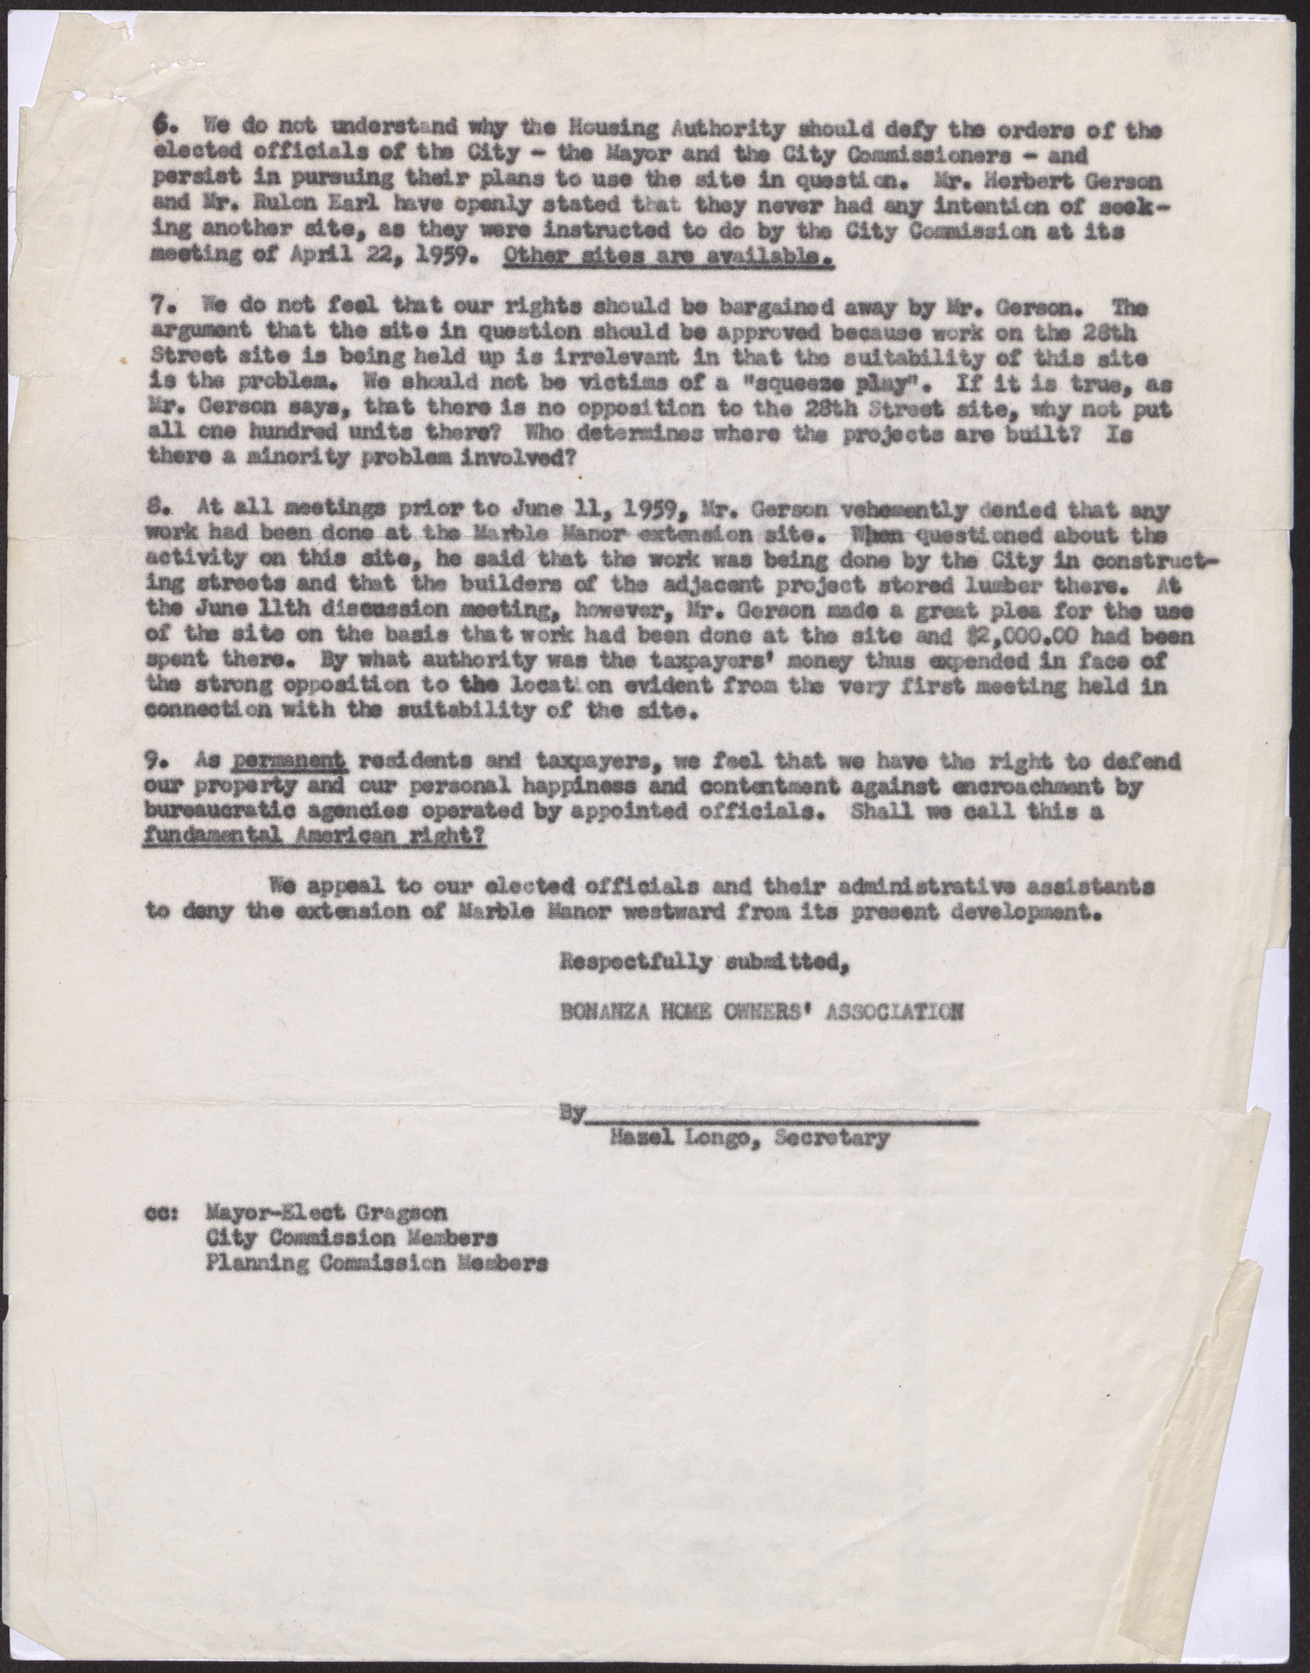 Response from the Bonanza Home Owners' Association regarding a "Low rent public housing site at Washington and McWilliams Streets" proposal, June 16, 1959, page 2